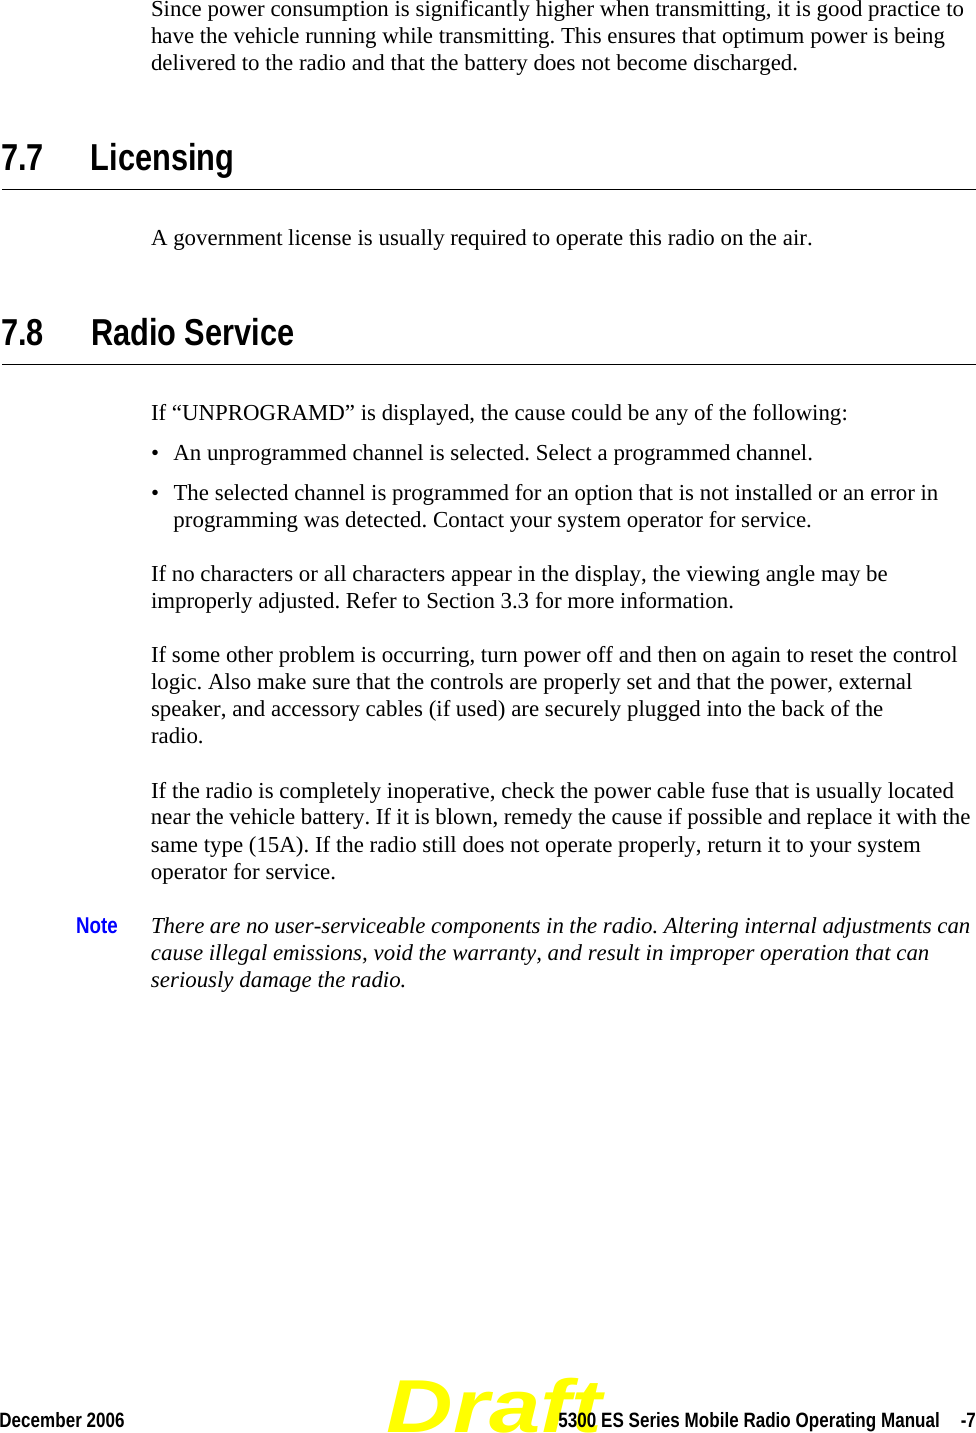 DraftDecember 2006 5300 ES Series Mobile Radio Operating Manual  -7Since power consumption is significantly higher when transmitting, it is good practice to have the vehicle running while transmitting. This ensures that optimum power is being delivered to the radio and that the battery does not become discharged.7.7 LicensingA government license is usually required to operate this radio on the air.7.8 Radio Service If “UNPROGRAMD” is displayed, the cause could be any of the following:• An unprogrammed channel is selected. Select a programmed channel.• The selected channel is programmed for an option that is not installed or an error in programming was detected. Contact your system operator for service.If no characters or all characters appear in the display, the viewing angle may be improperly adjusted. Refer to Section 3.3 for more information.If some other problem is occurring, turn power off and then on again to reset the control logic. Also make sure that the controls are properly set and that the power, external speaker, and accessory cables (if used) are securely plugged into the back of the  radio.If the radio is completely inoperative, check the power cable fuse that is usually located near the vehicle battery. If it is blown, remedy the cause if possible and replace it with the same type (15A). If the radio still does not operate properly, return it to your system operator for service.Note There are no user-serviceable components in the radio. Altering internal adjustments can cause illegal emissions, void the warranty, and result in improper operation that can seriously damage the radio.